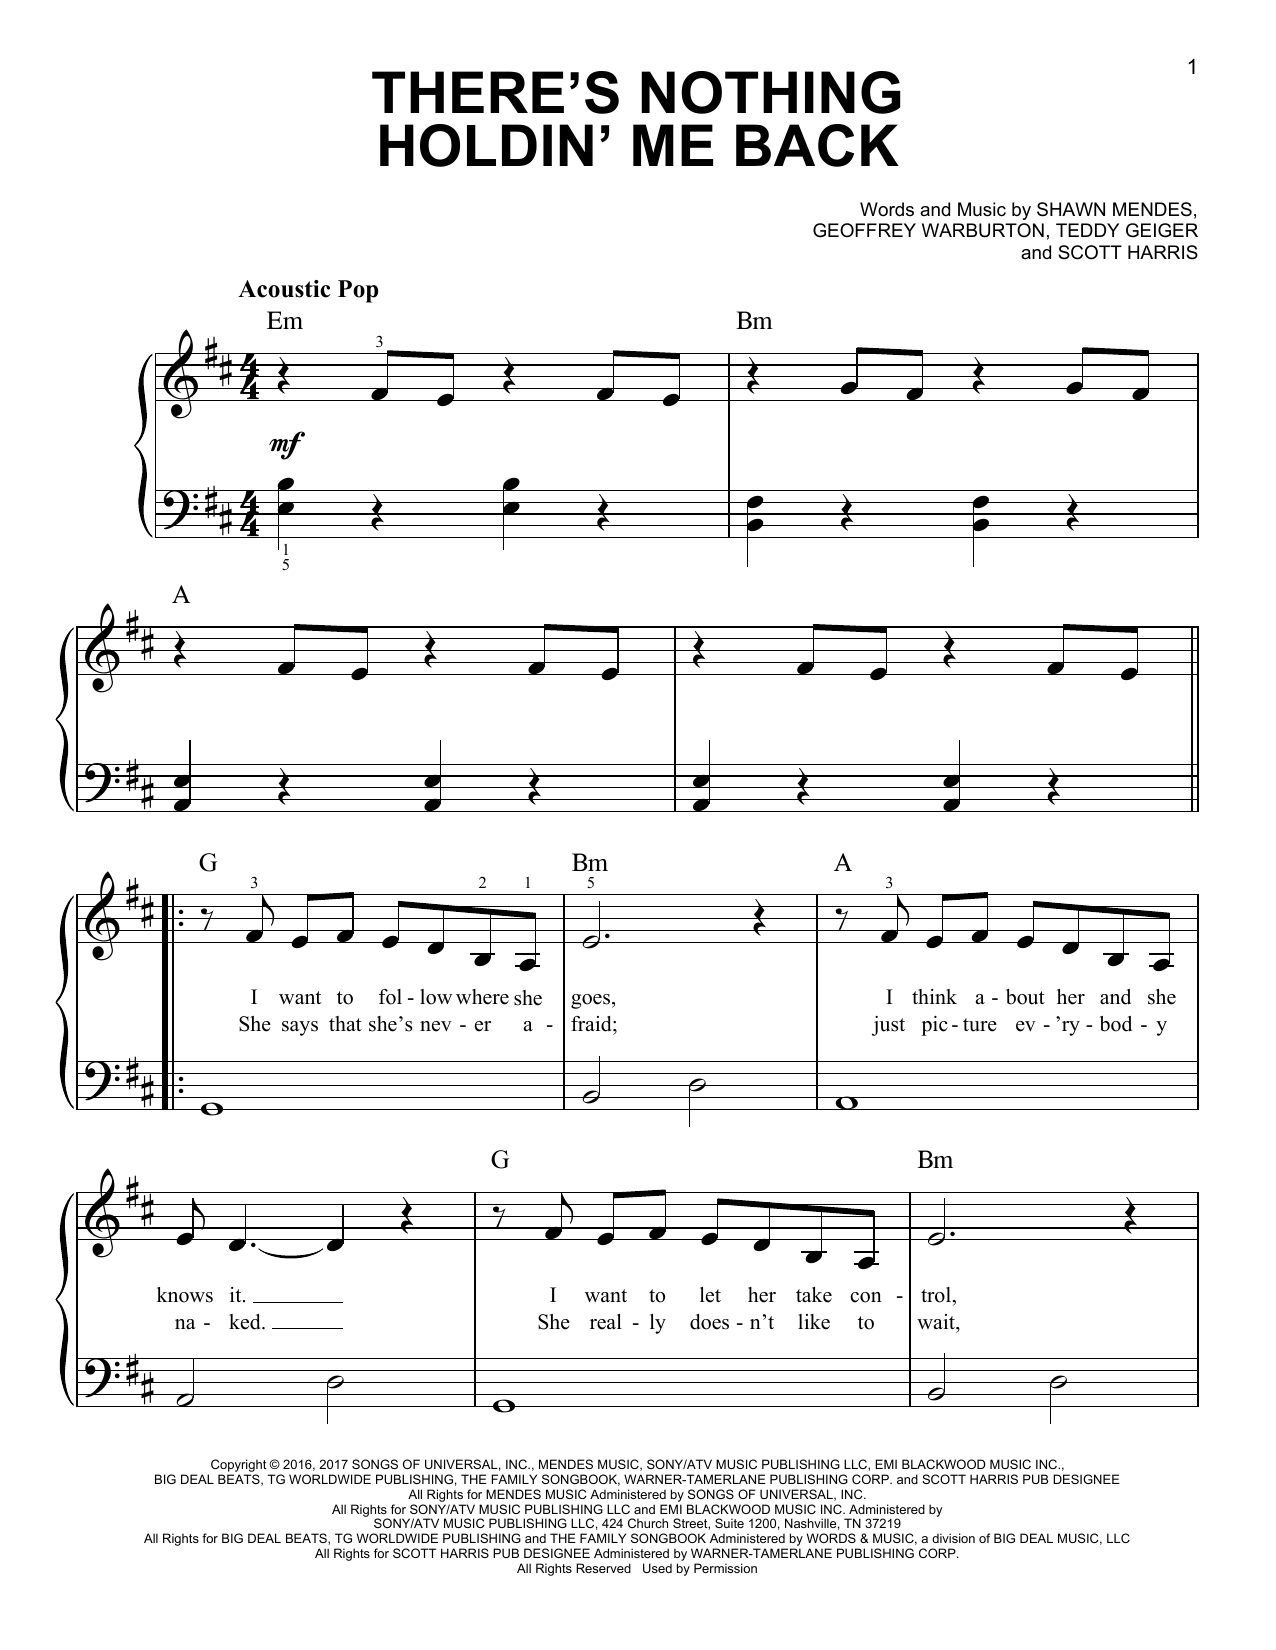 Download Shawn Mendes There's Nothing Holdin' Me Back Sheet Music